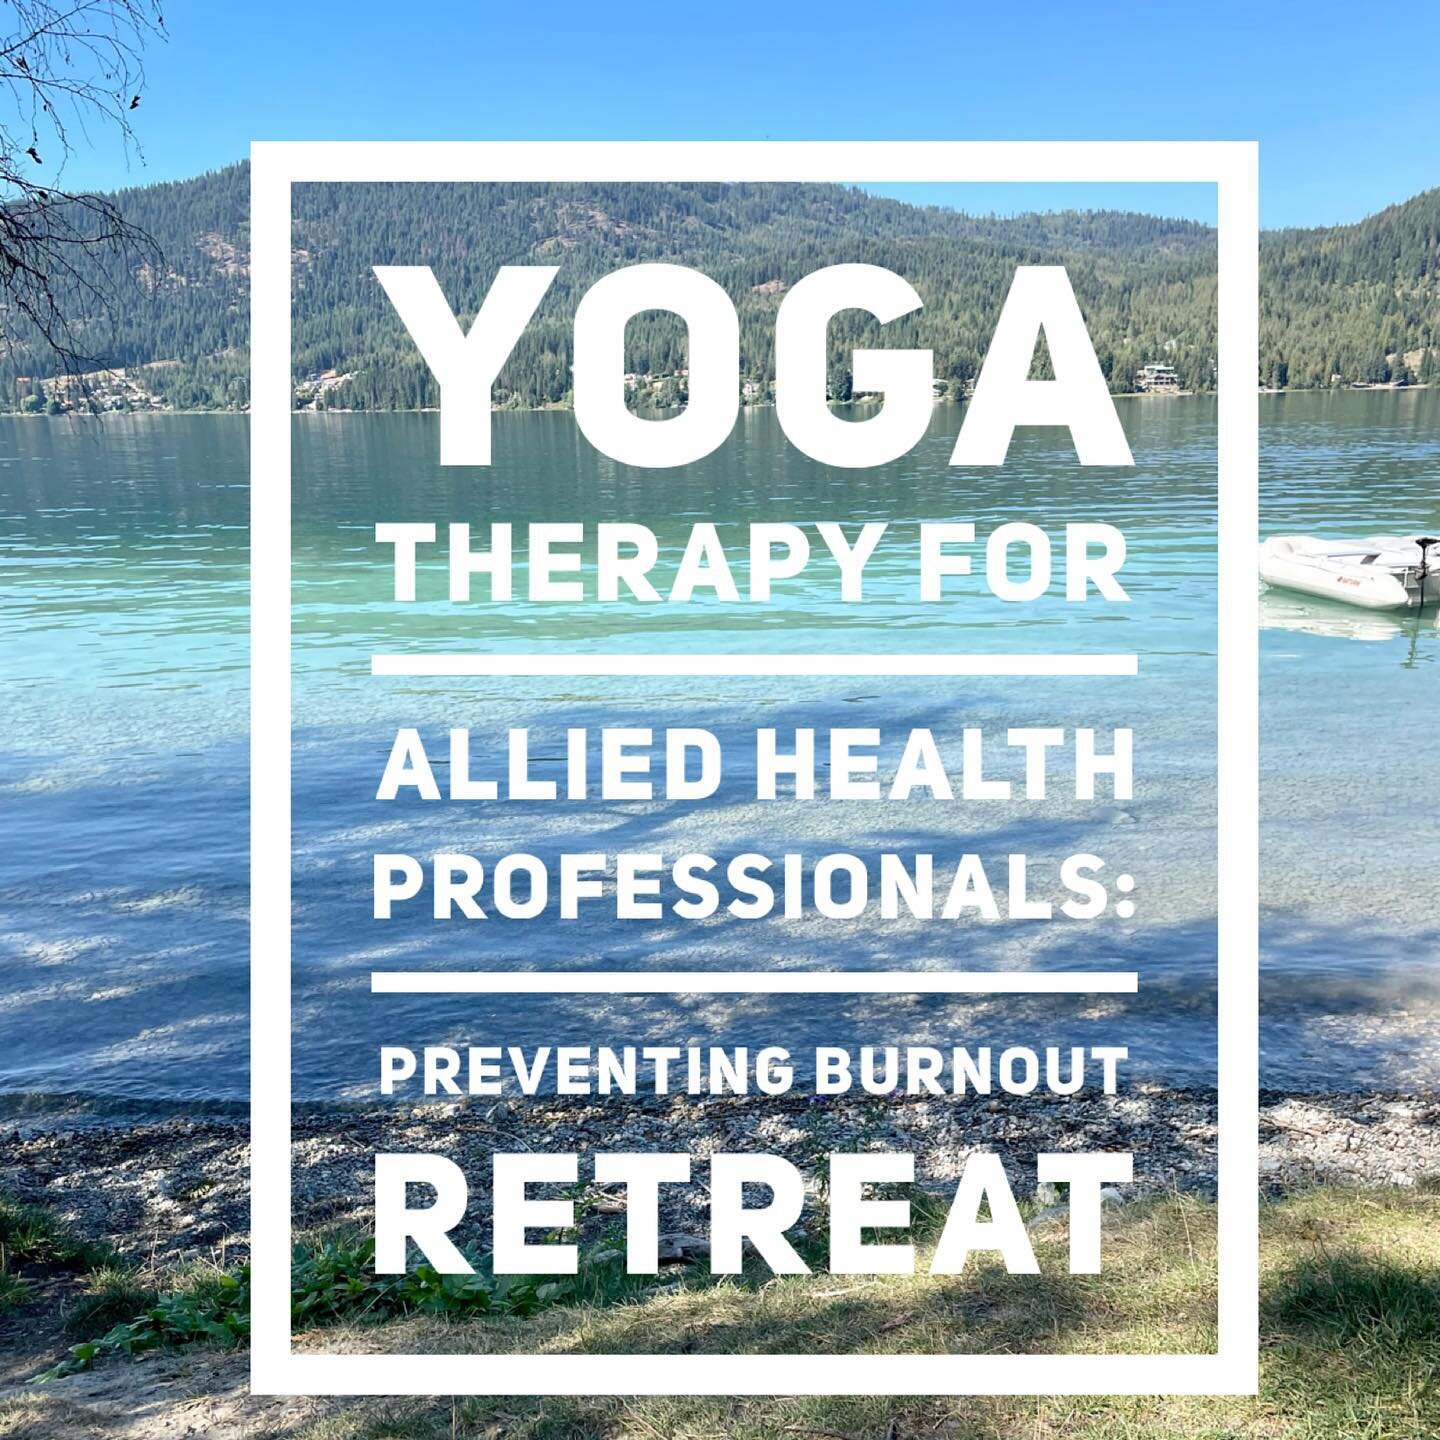 ✨September 22-25, 2023 ✨
@whitelakecabins 
Scoop our early bird rate by April 30th!
.
Learn how to prescribe yoga as exercise for spinal and hip pathologies along with safe modifications and props. Learn to assess breathing patterns and TA/pelvic flo